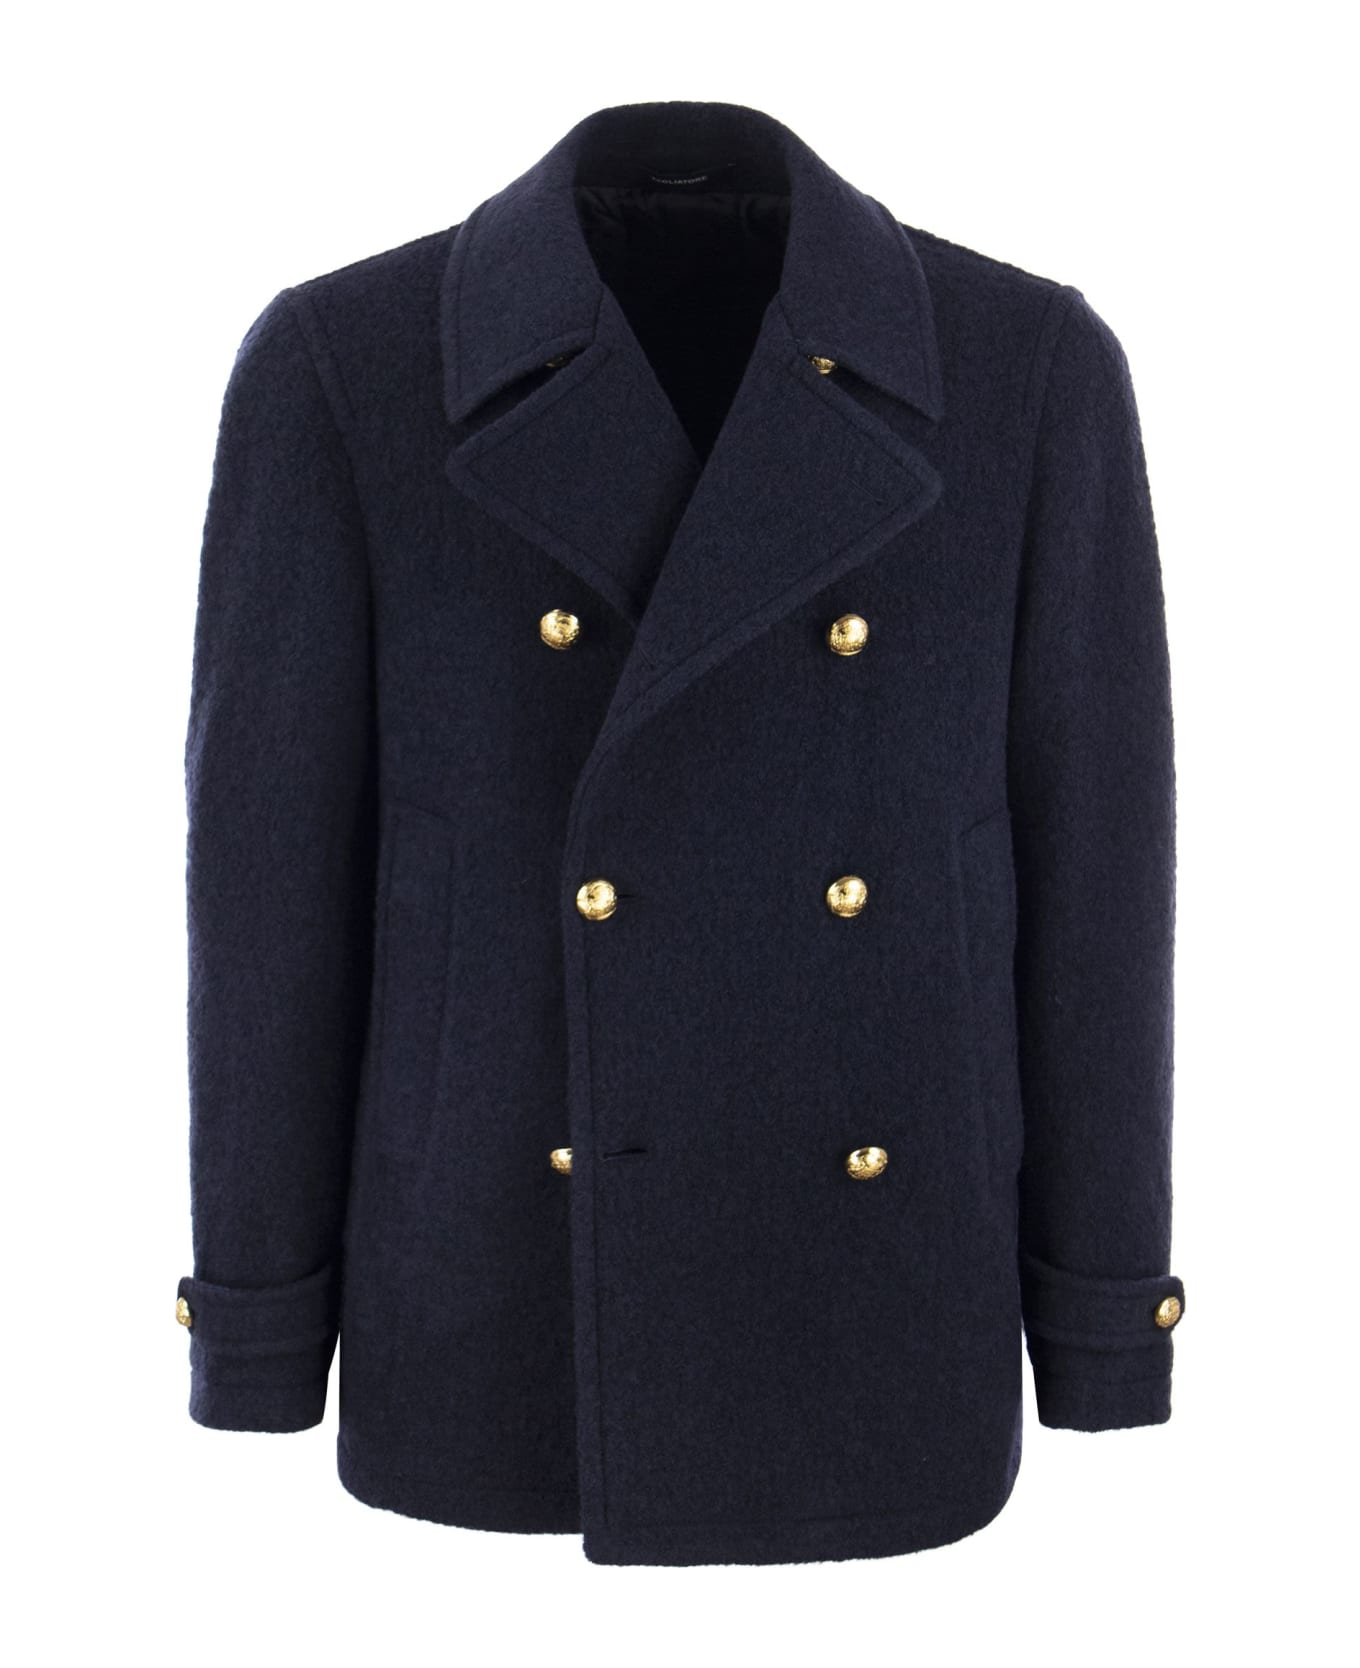 Tagliatore Double-breasted Coat - Navy Blue